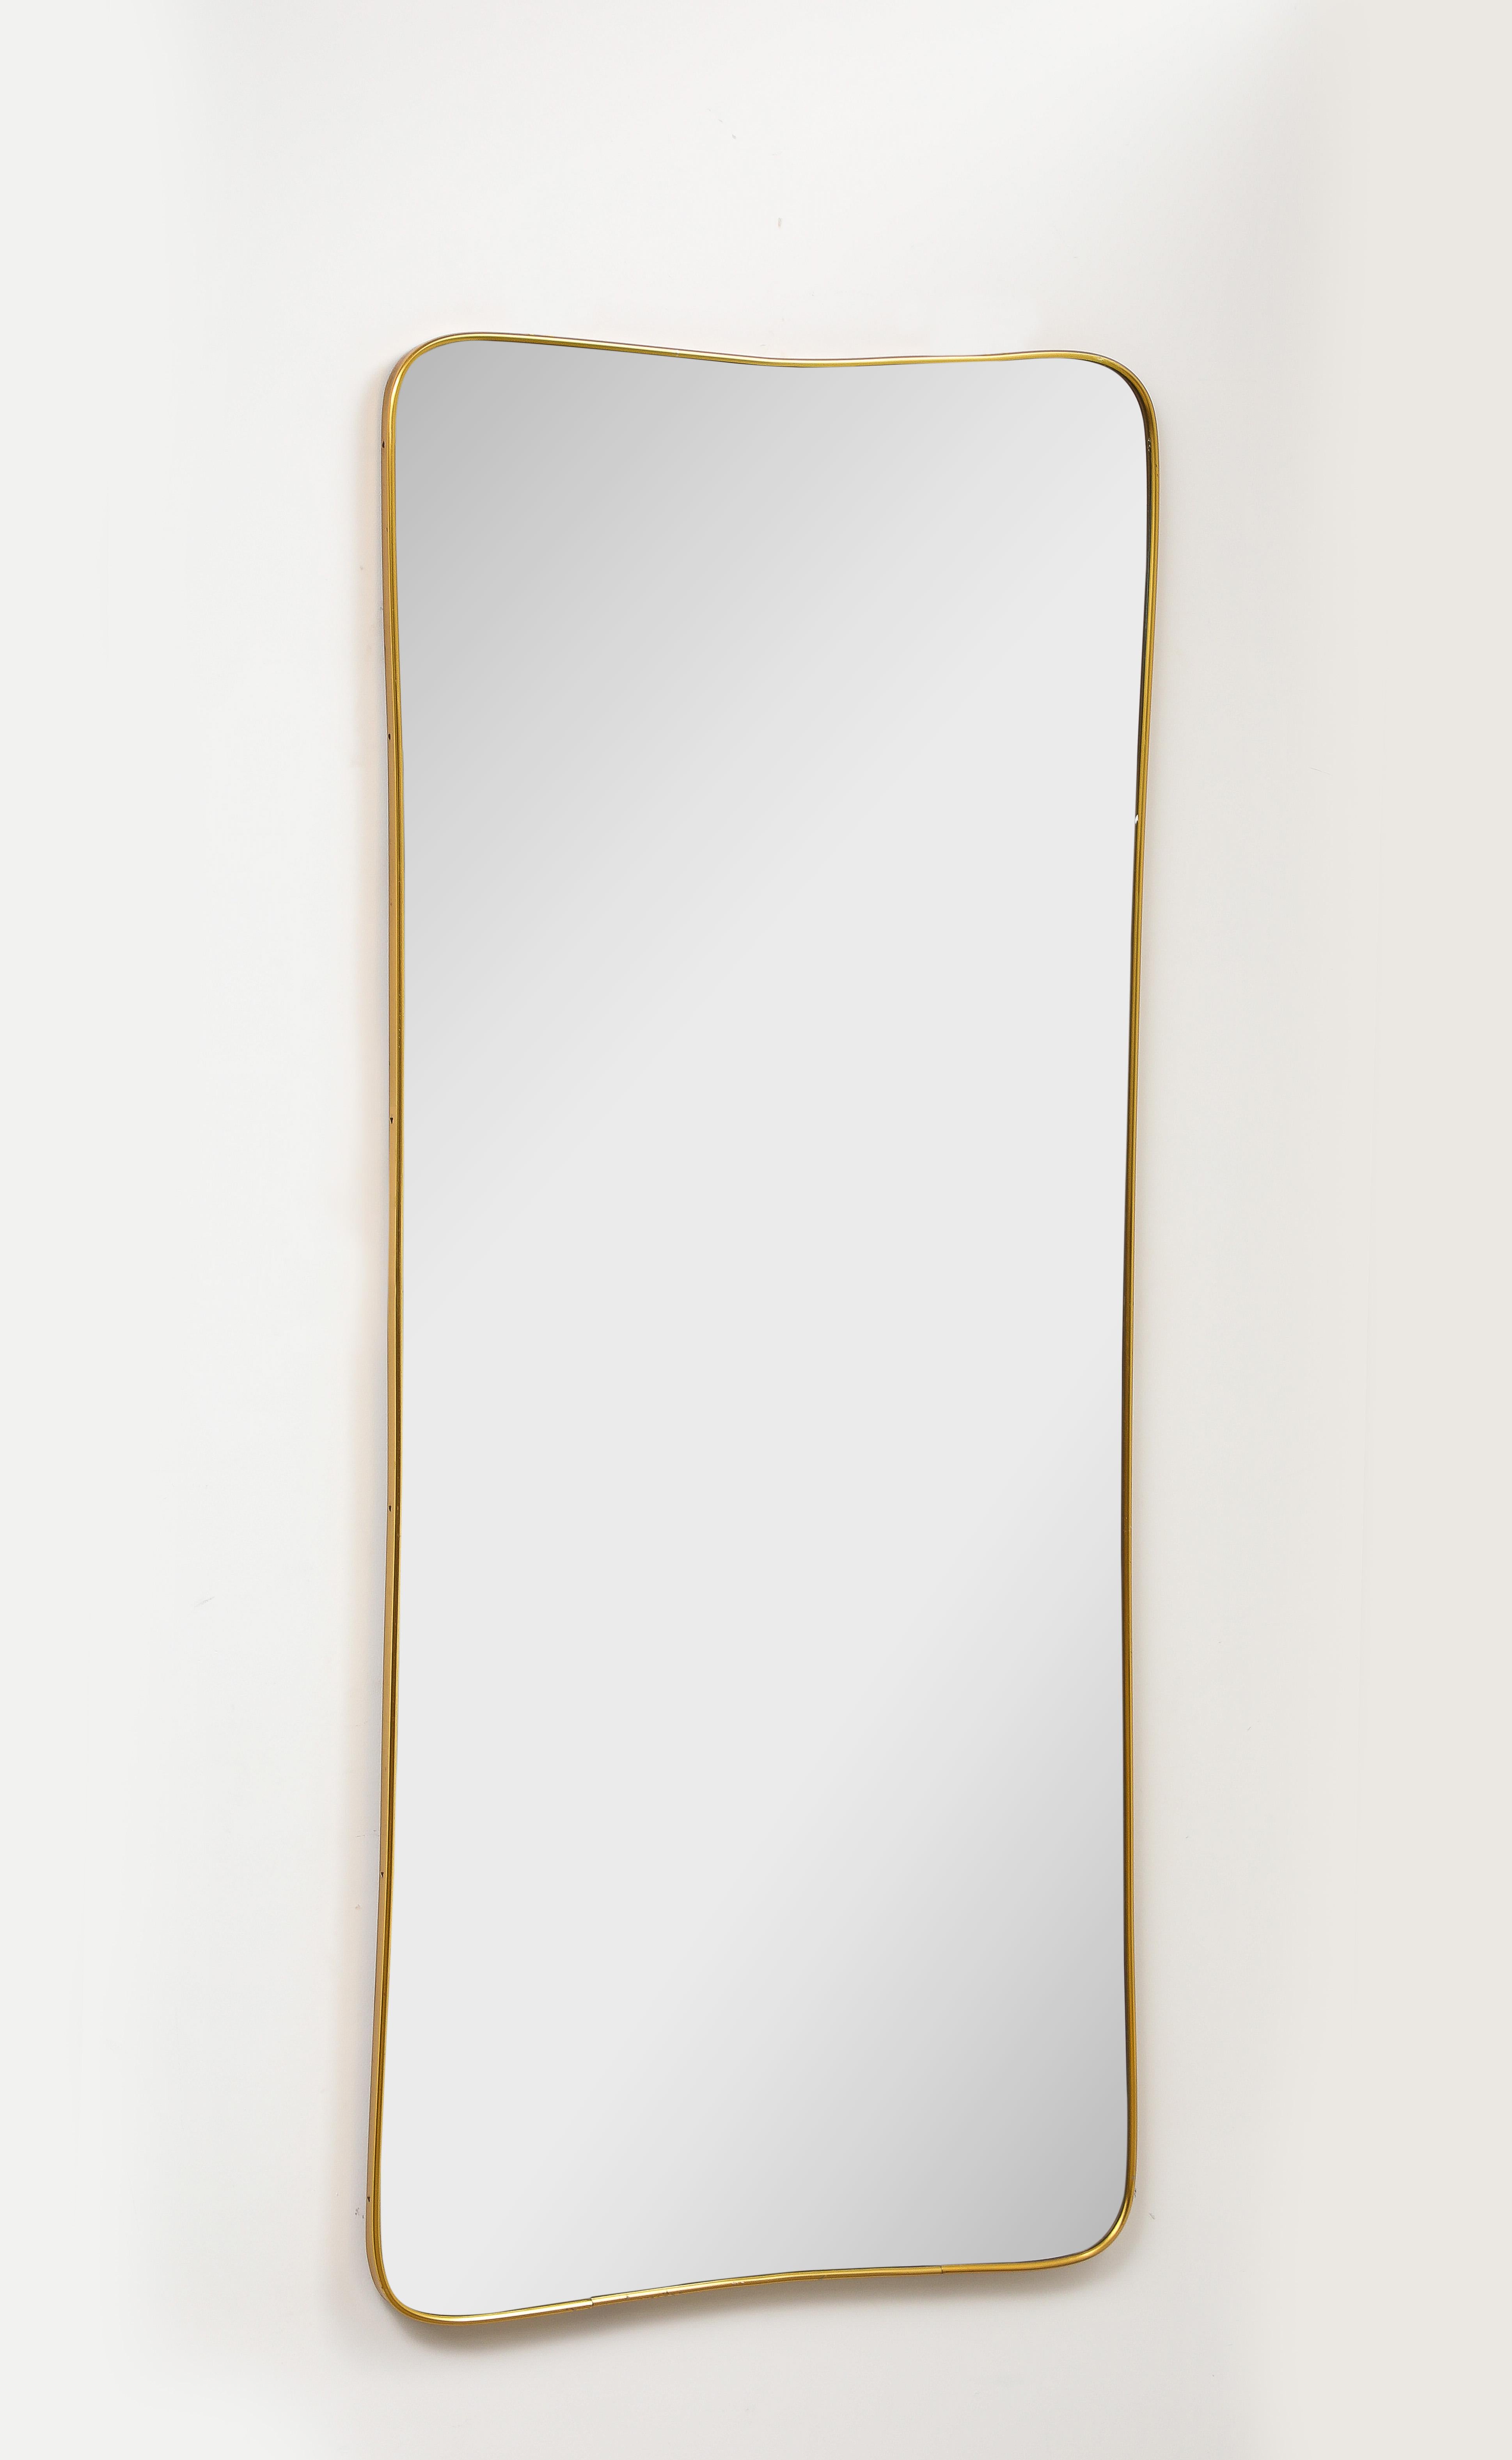 Gio Ponti Style Modernist Dressing Mirror, Italy, 1950's For Sale 1